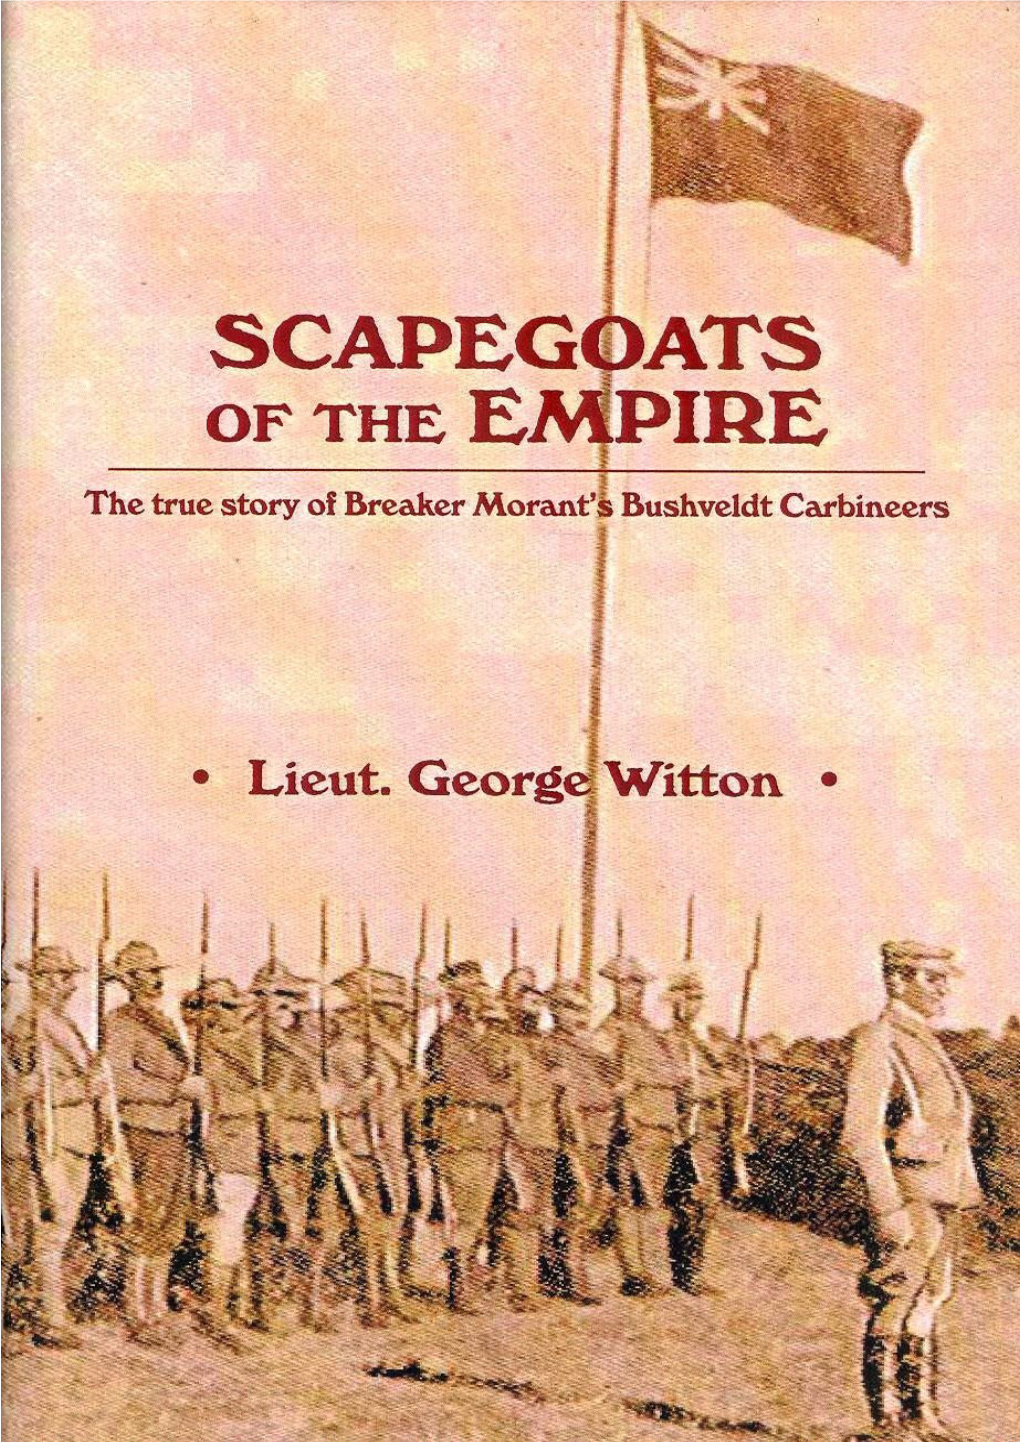 Scapegoats of the Empire: the True Story of Breaker Morant’S Bushveldt Carbineers Author: Lieut